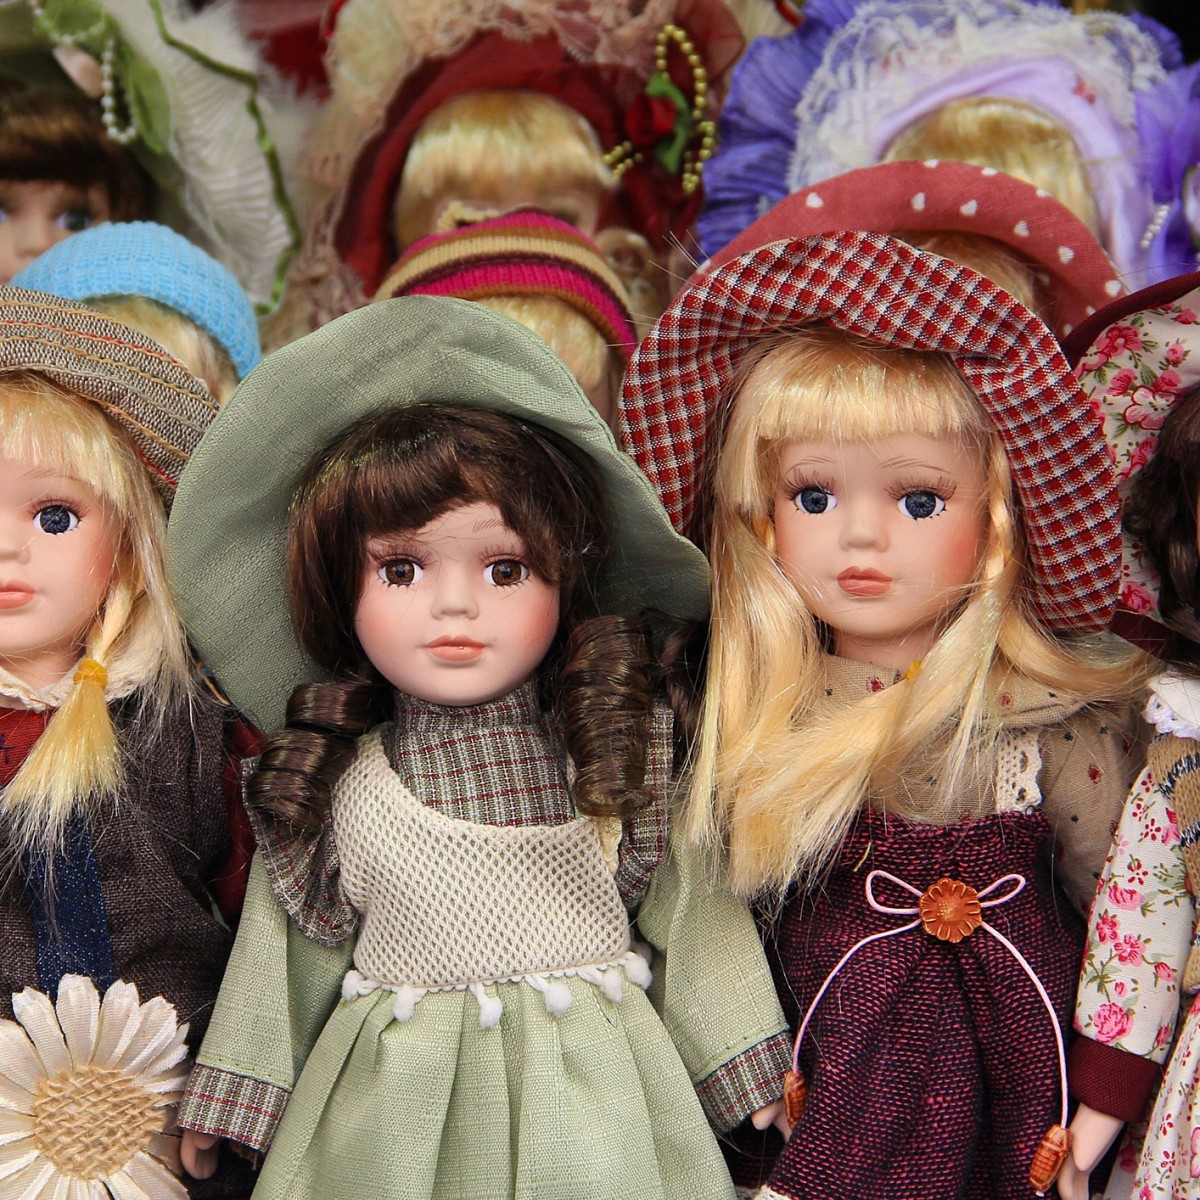 Finding The Current Value Of Porcelain Dolls Thriftyfun,Turkey Rice Casserole